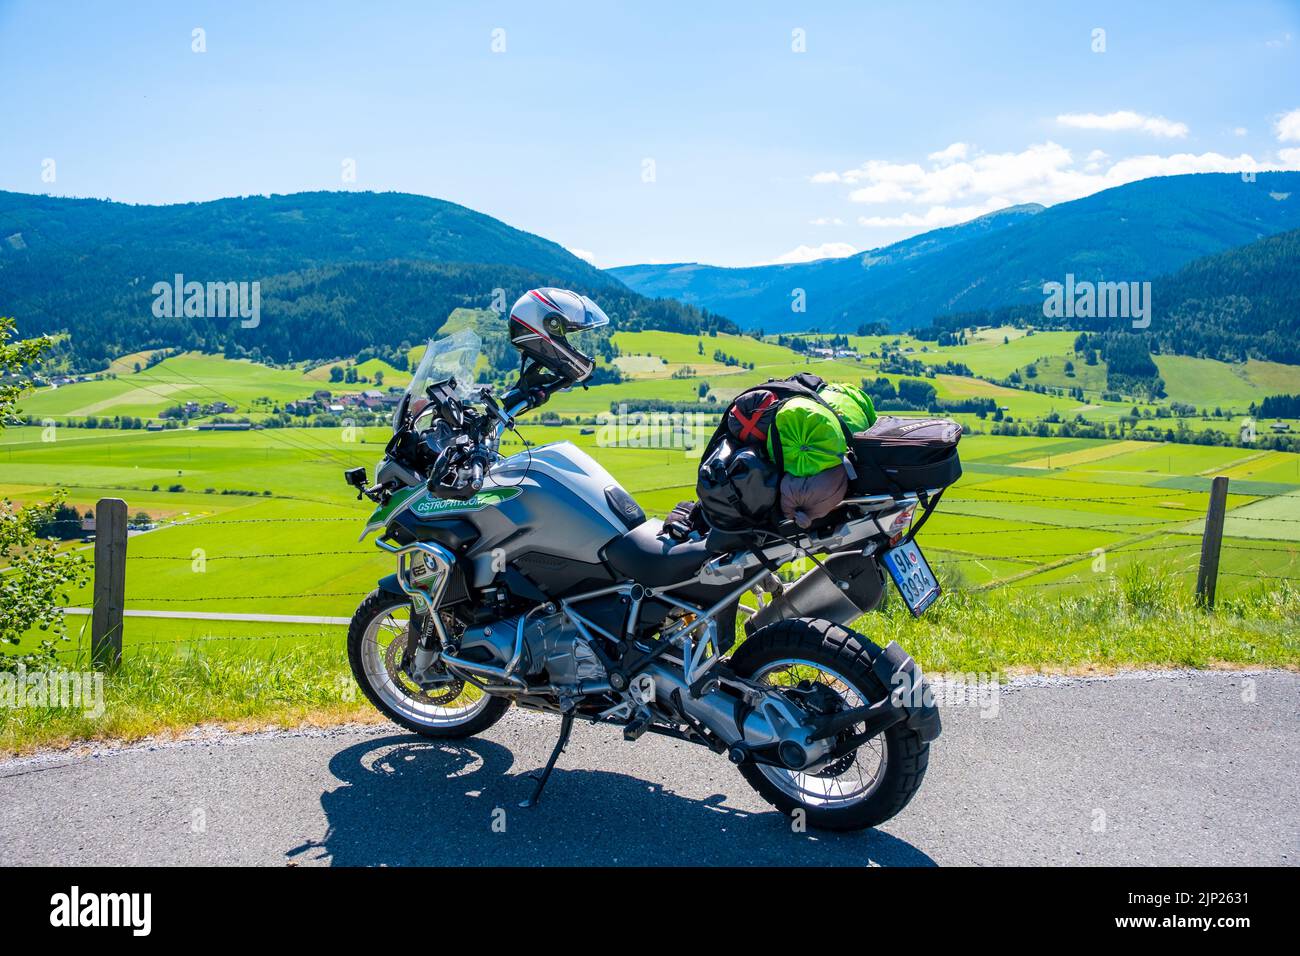 Dolomites Italy - July 2, 2022: Motorcycle with full equipment on the side of a rural mountain alpine road in area of Dolomites, Italy Stock Photo